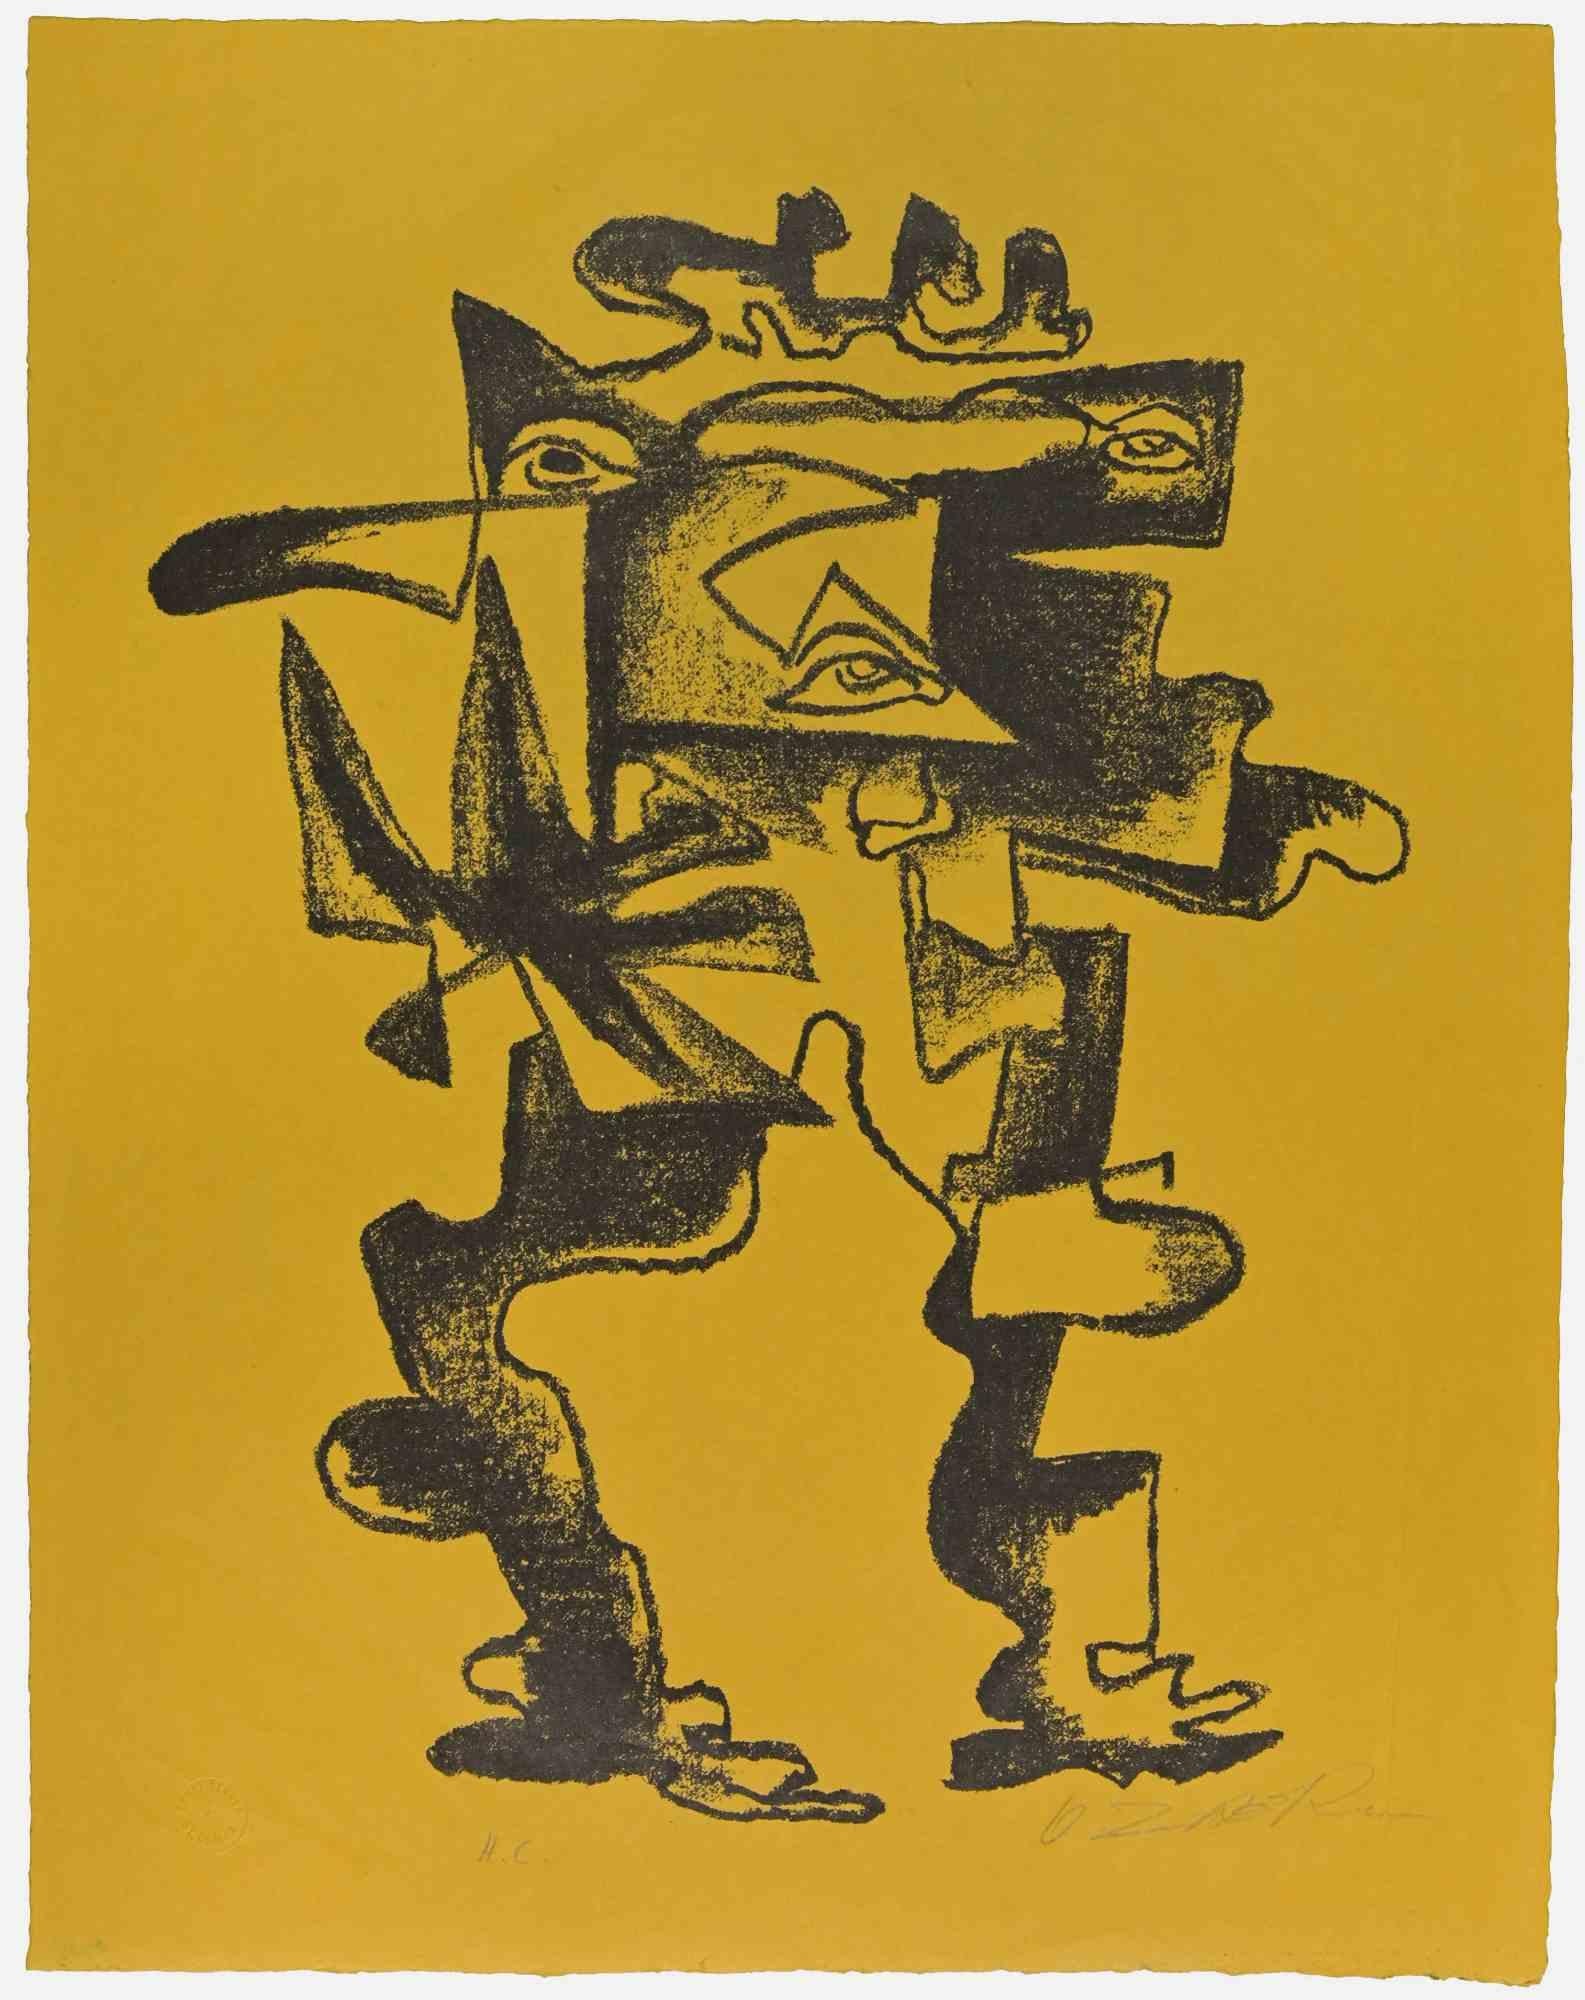 Untitled is an artwork realized by Ossip Zadkine (1890-1967).

Lithograph, 51x39.5 cm. 

Signed and numbered (Exemplary H.C.) in pencil on the front.

Blind stamp Erker Presse St. Gallen.

Bibliography: Catalog Raisonné N.169

Ossip Zadkine,